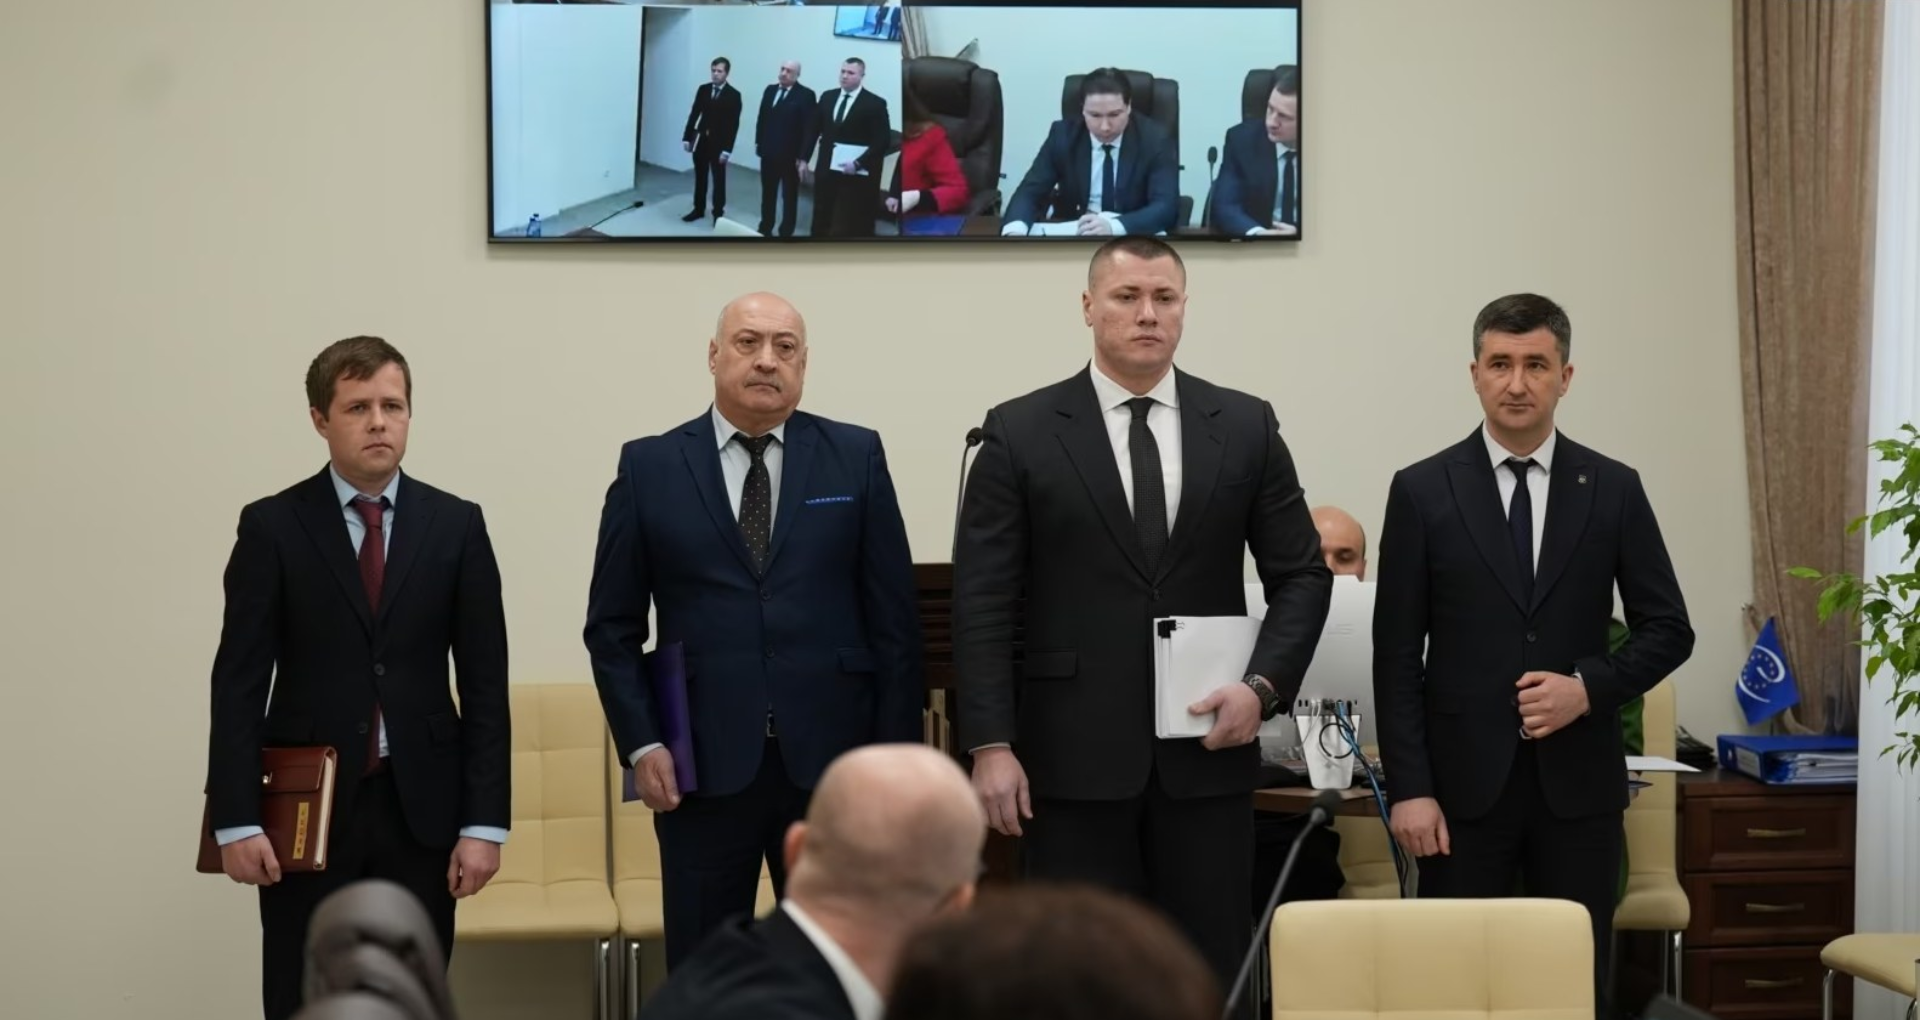 Authorities announce they have uncovered a meeting of “criminal authorities” from Moldova and Ukraine to share spheres of influence